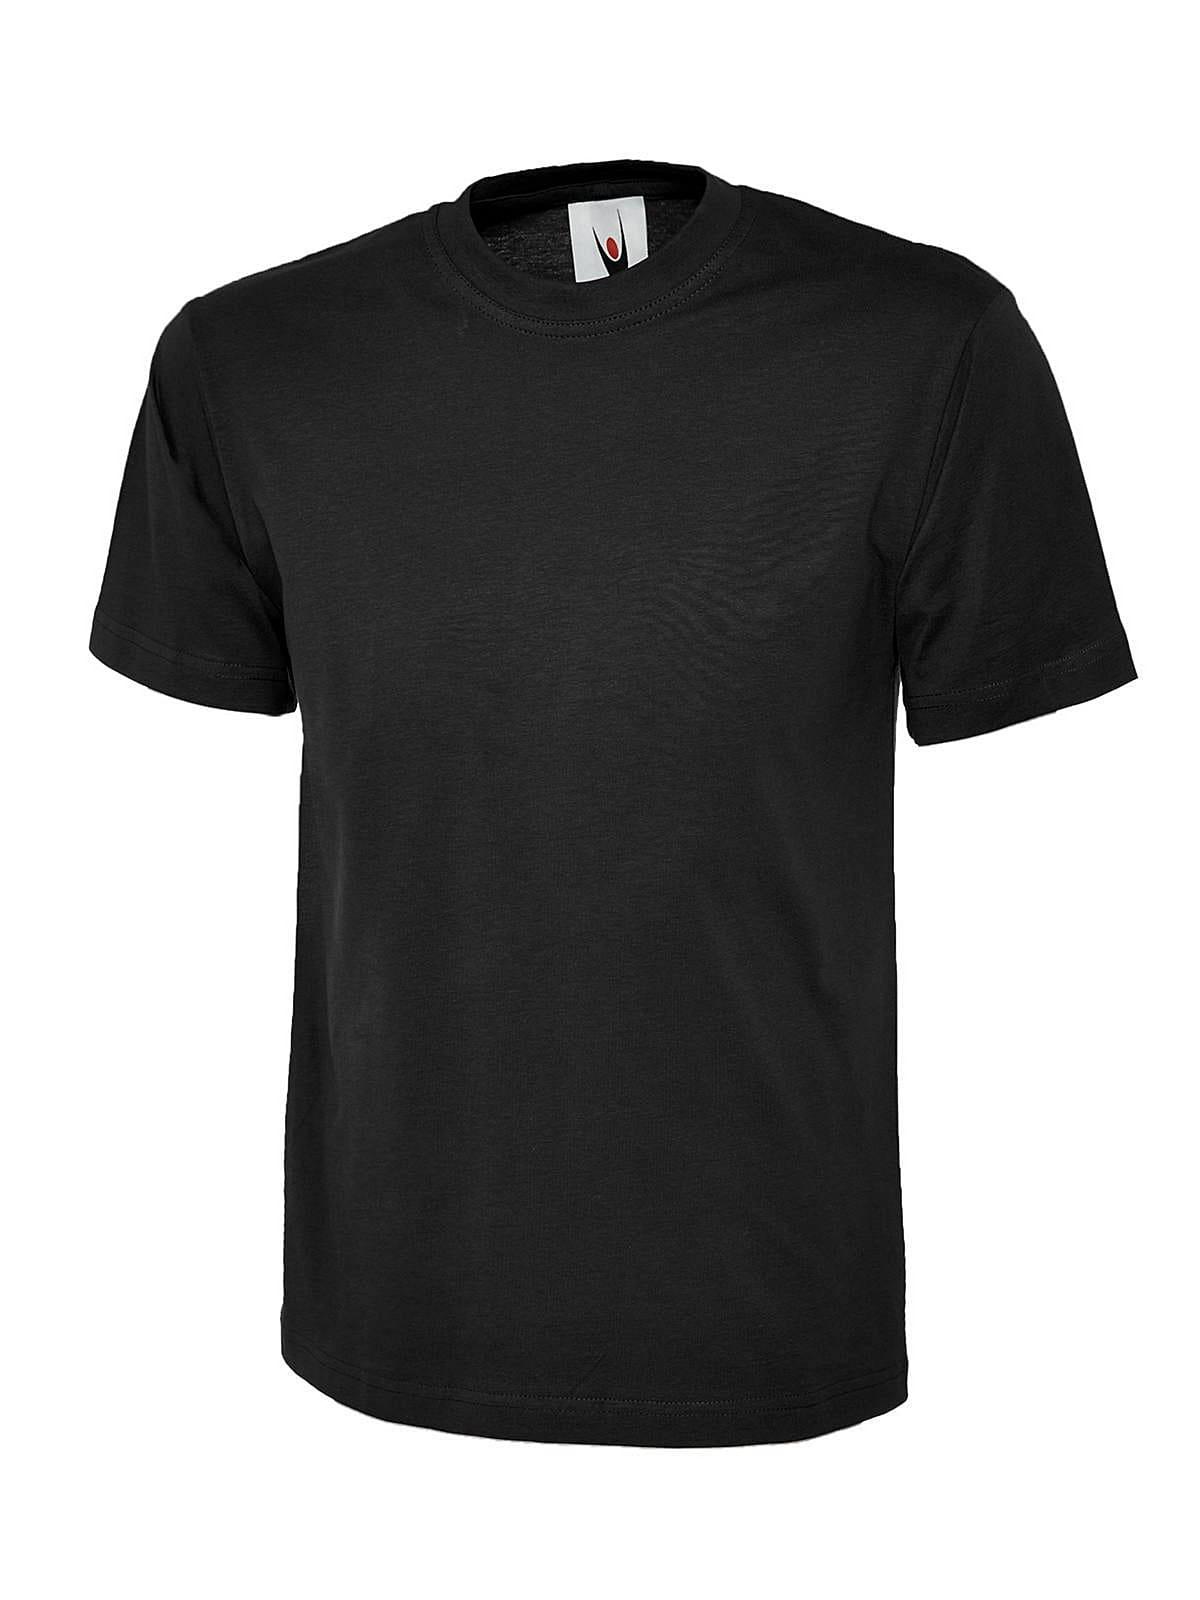 Uneek Childrens 180GSM T-Shirt in Black (Product Code: UC306)